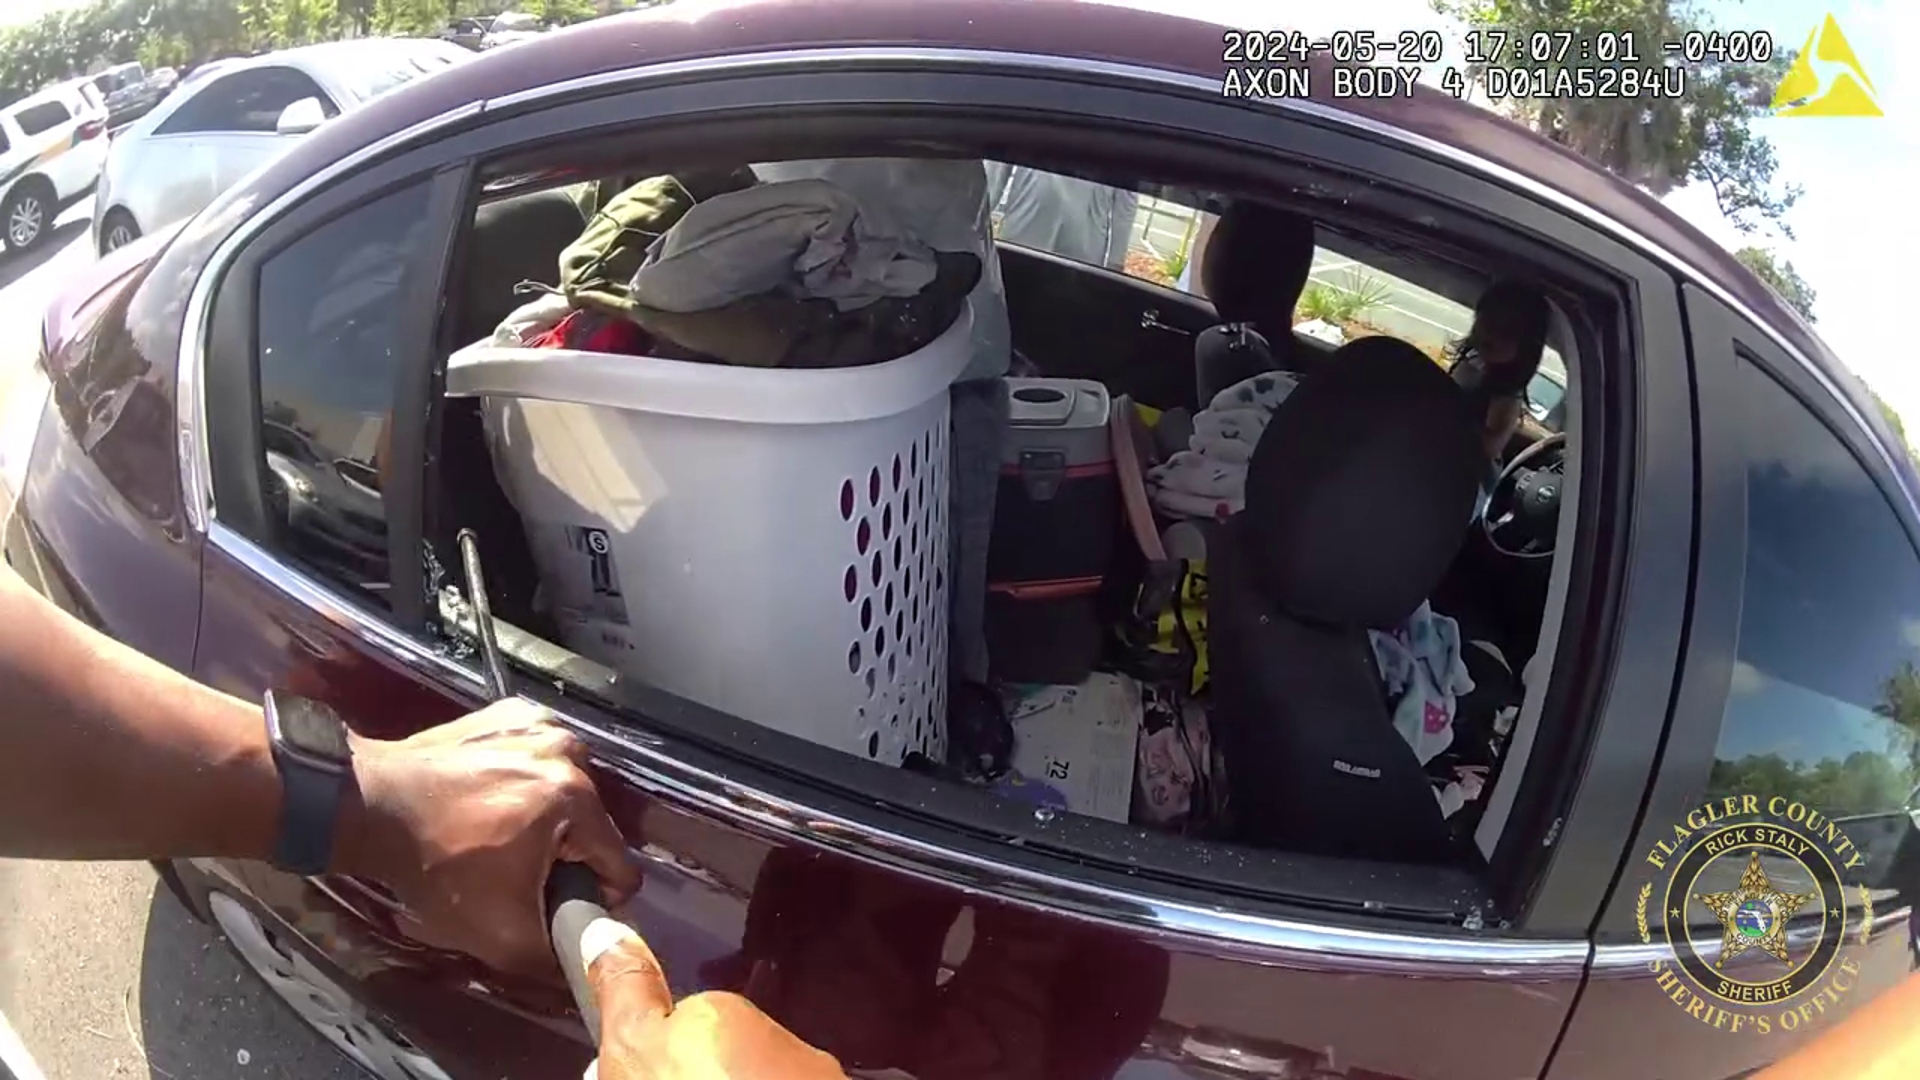 Flagler County, Florida, deputies sprang into action to rescue a 1-year-old girl who got locked in a hot car.